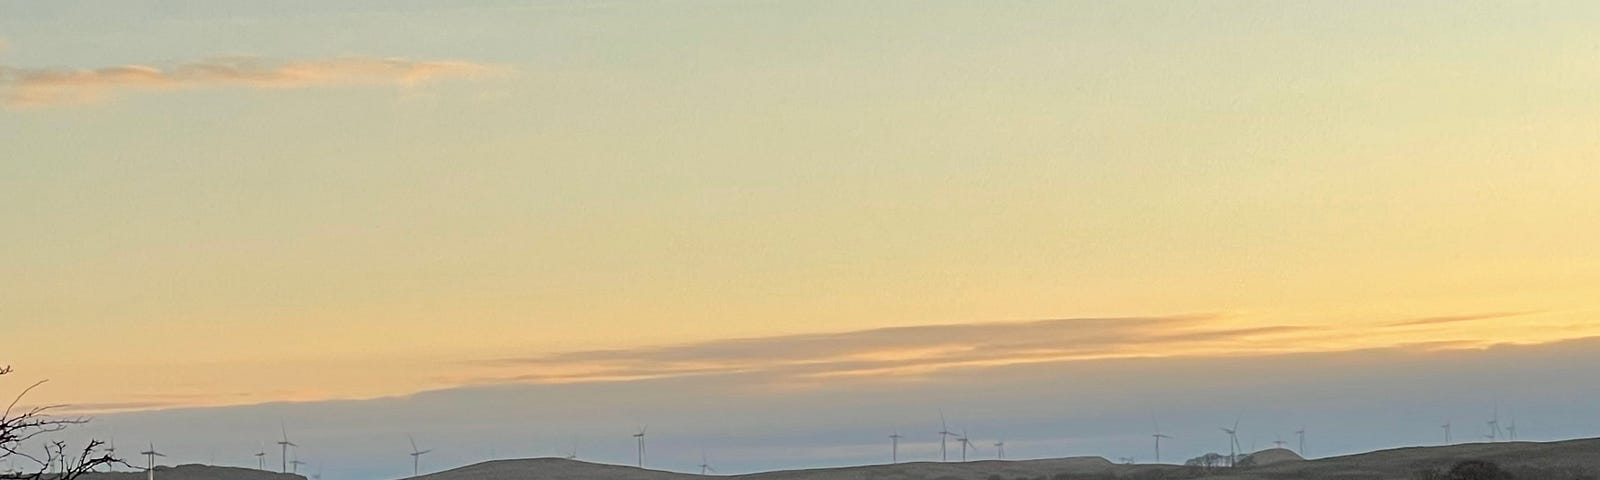 The sun is setting behind hills in the mid-distance. Wind turbines are spread out across the skyline